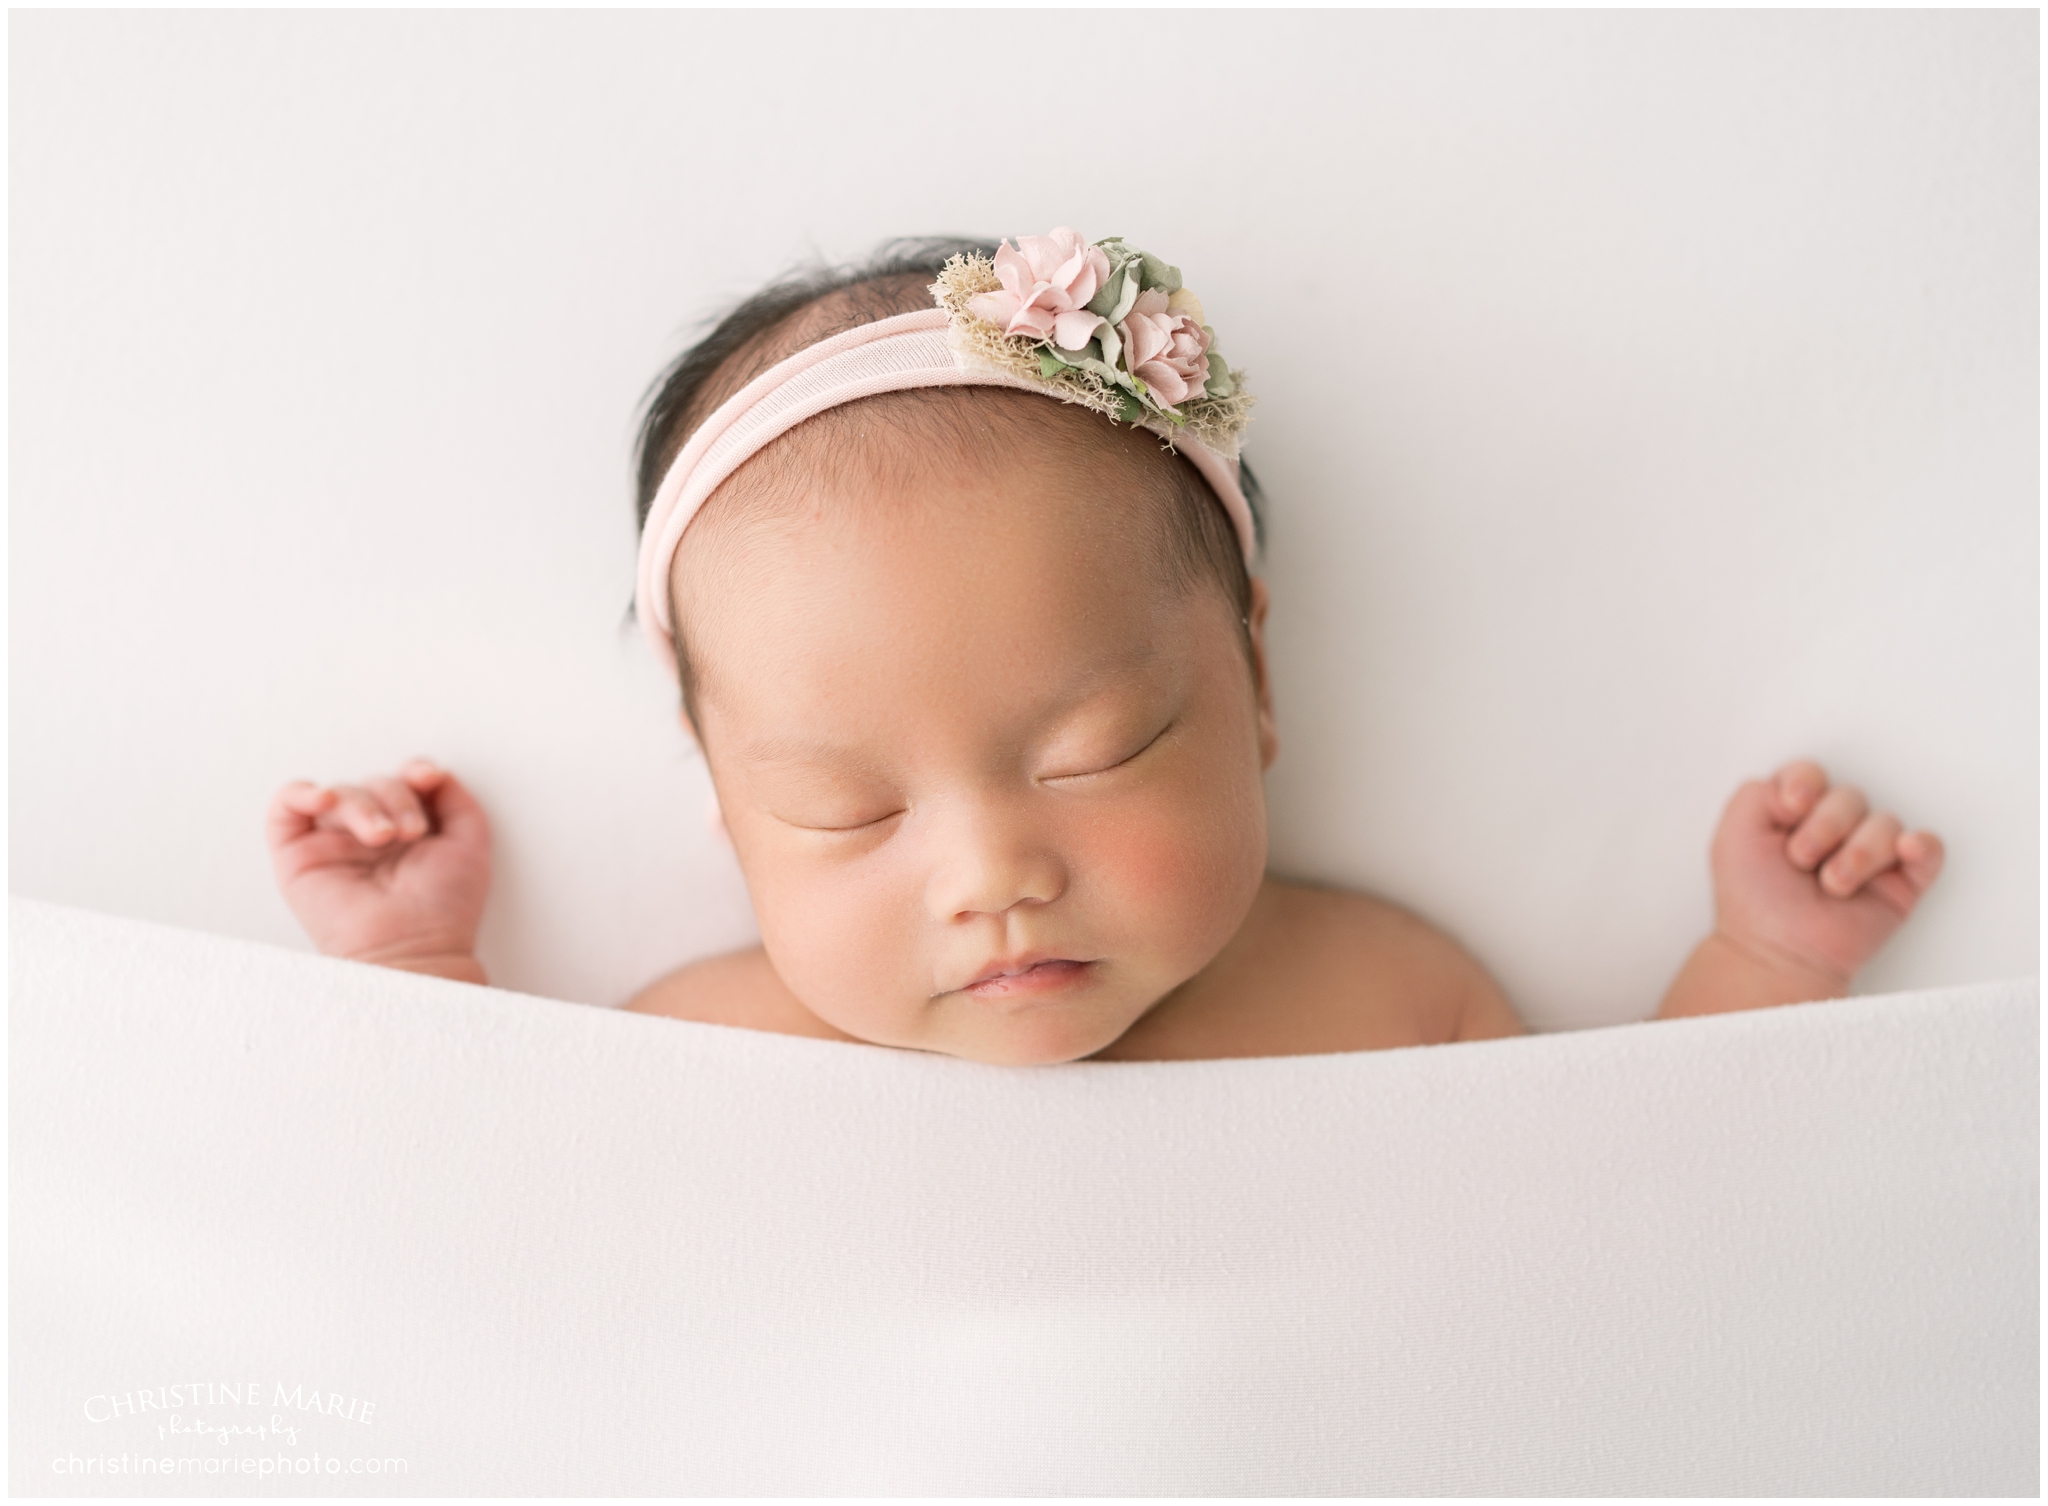 simple natural newborn photography, christine marie photography